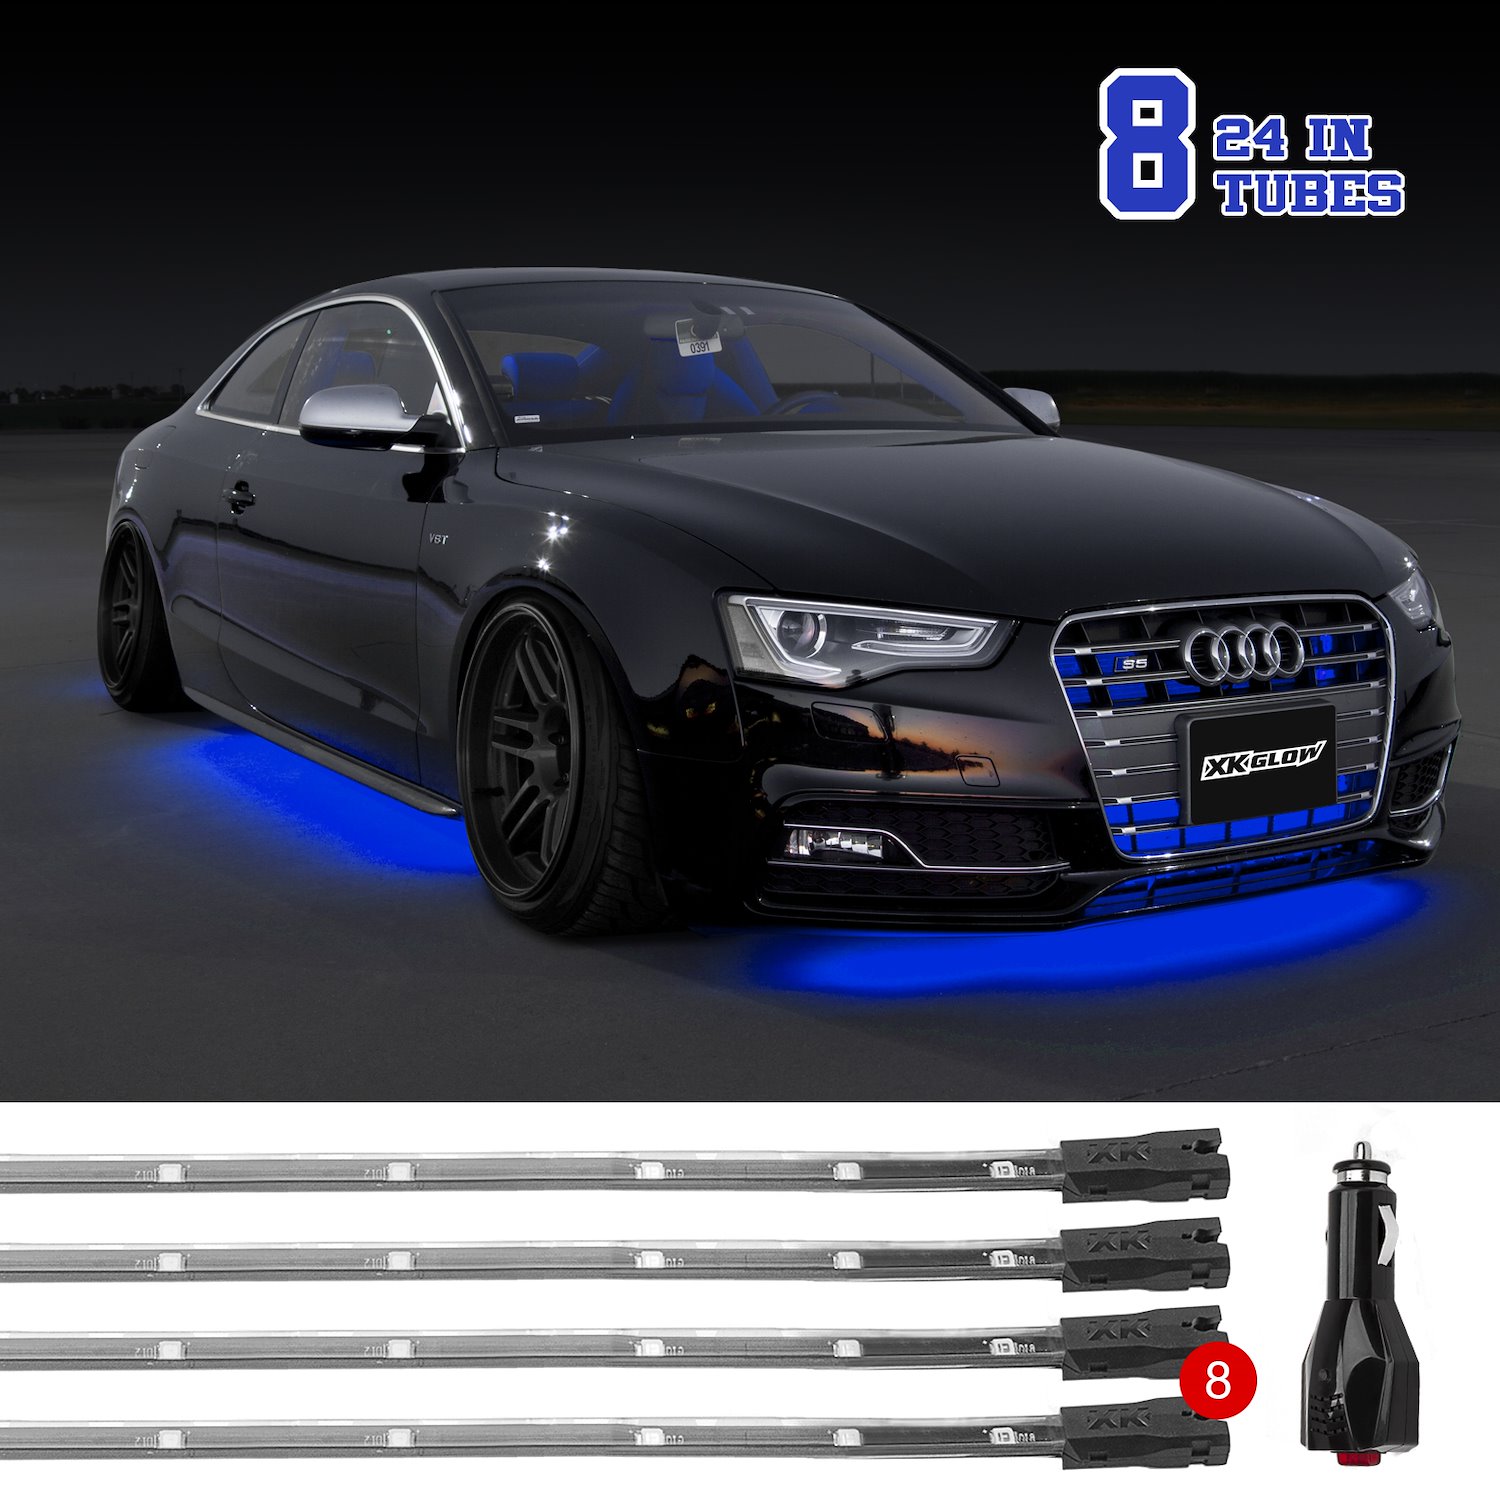 XK041002-B 8 x 24 in. Tube XKGLOW Underglow LED Accent Light Car/Truck Kit, Single-Color Blue, Universal Fit